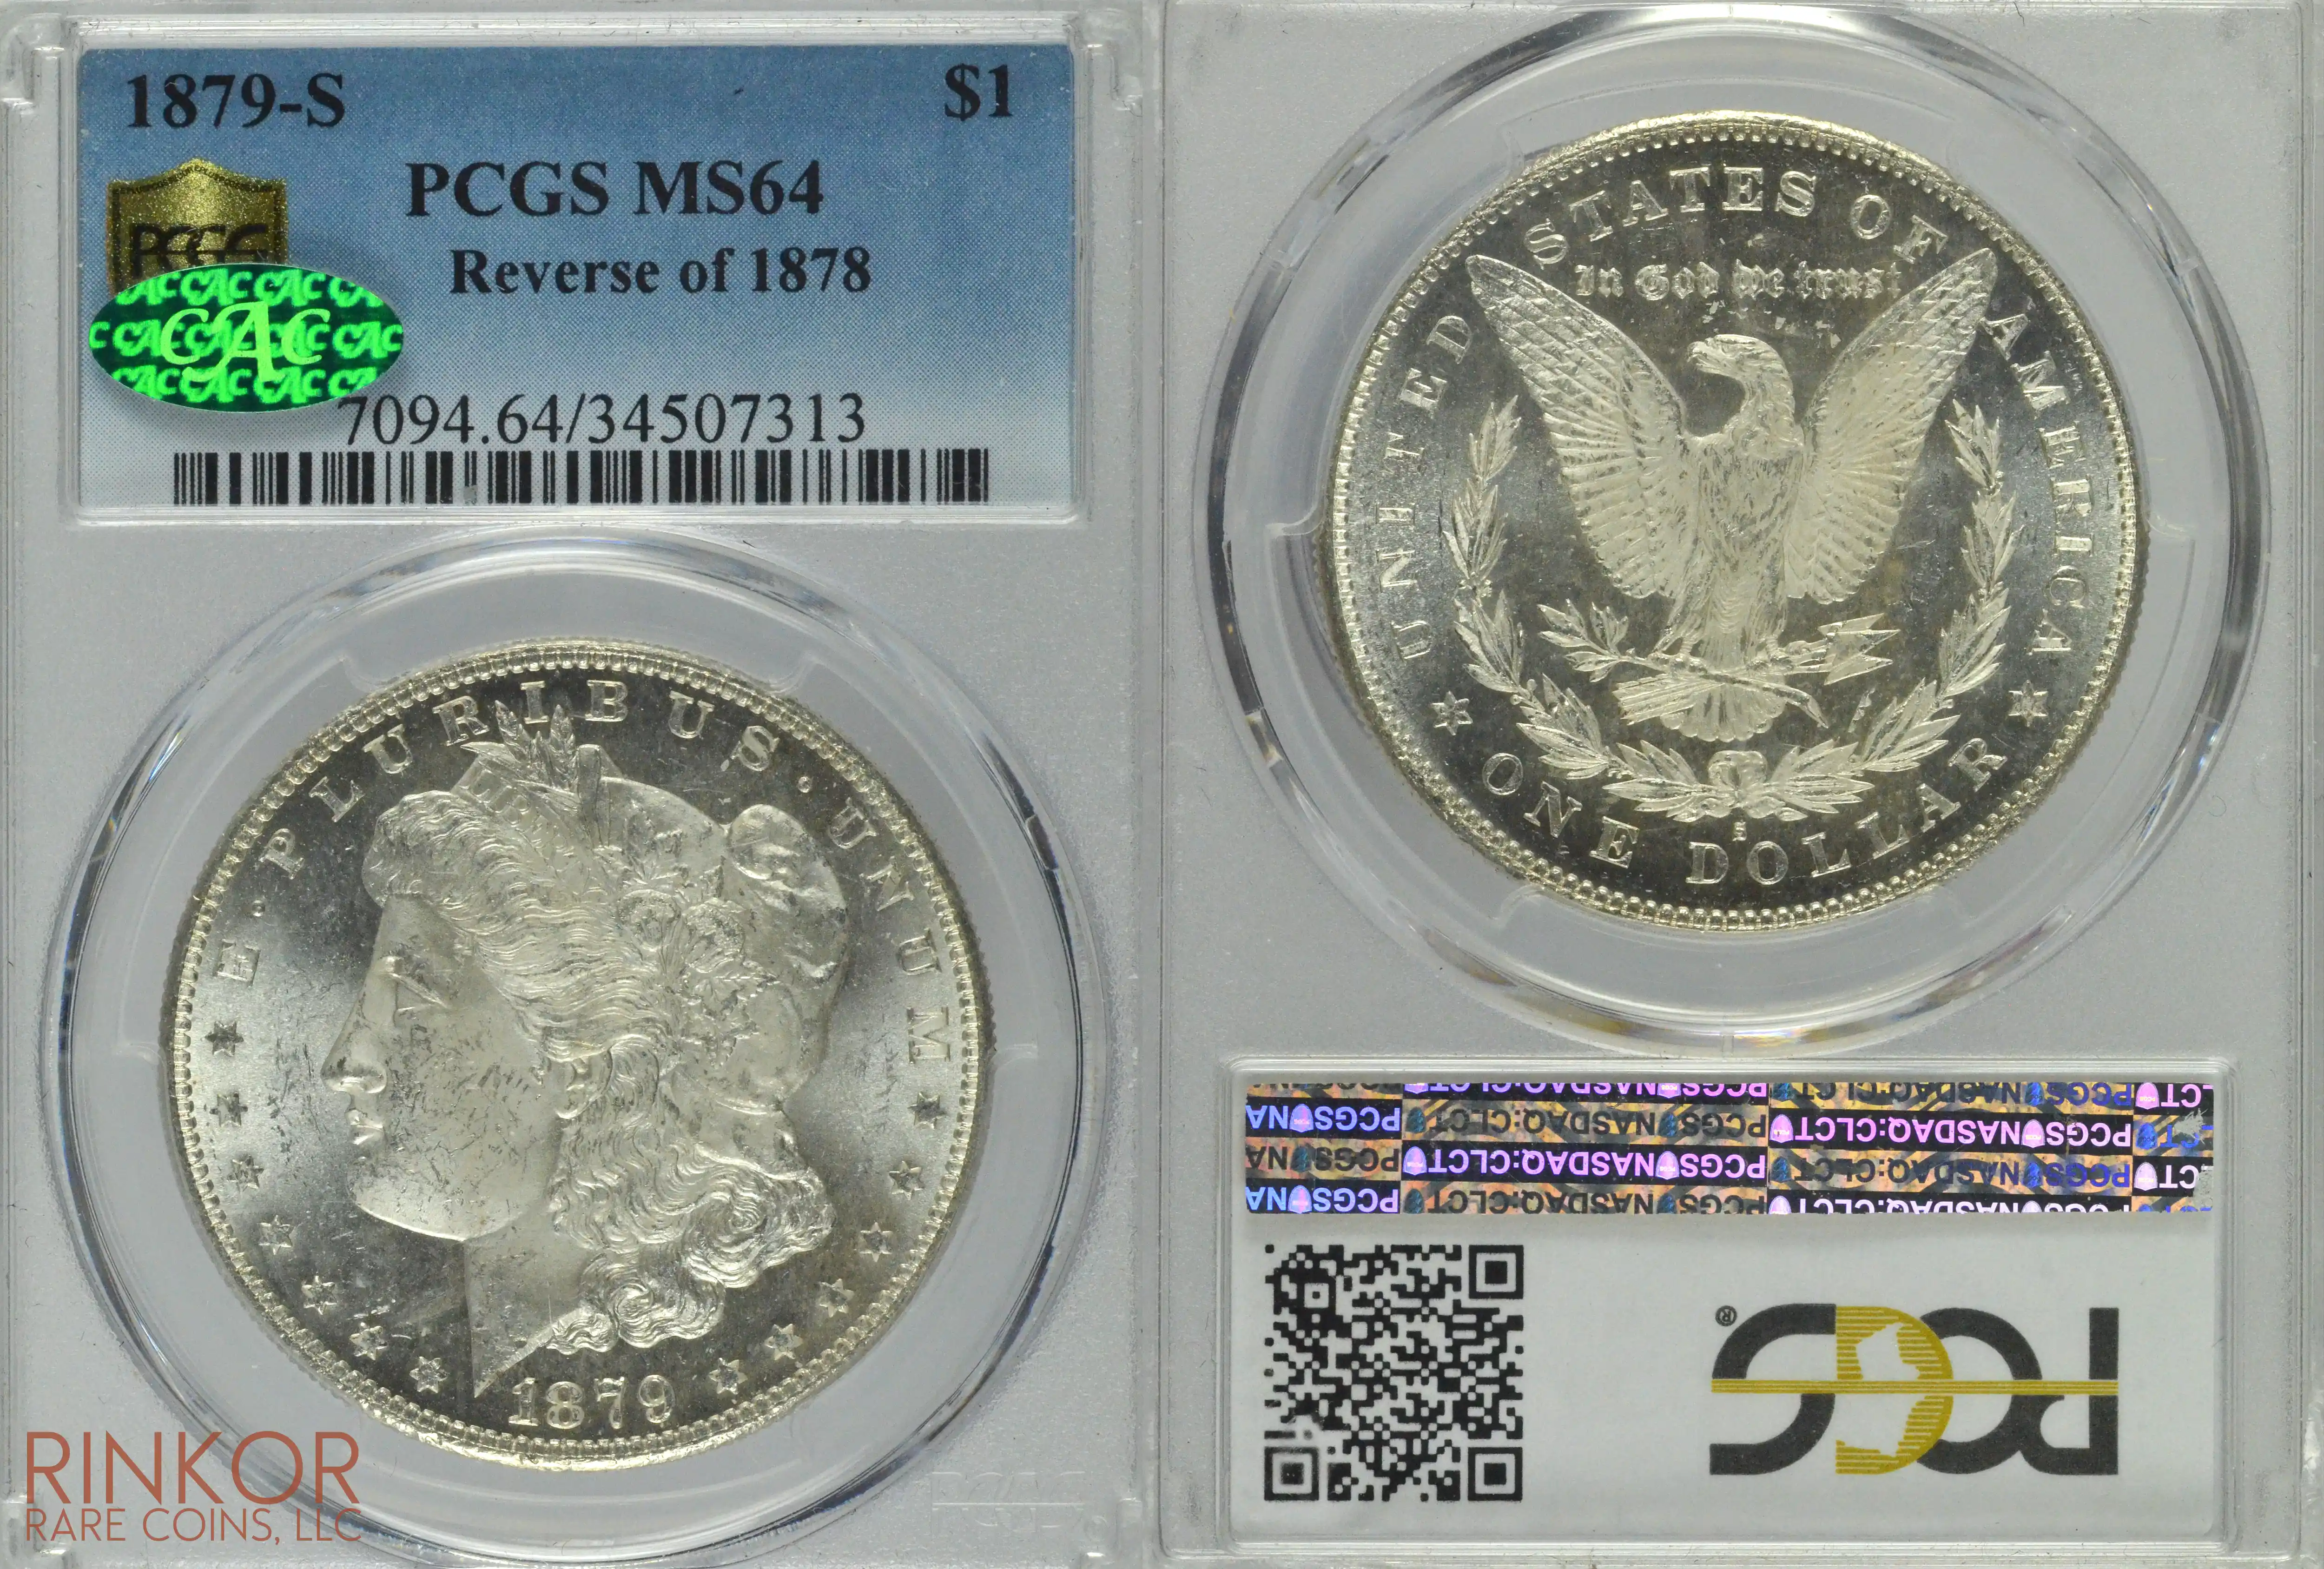 1879-S $1 Reverse of 1878 PCGS MS 64 CAC